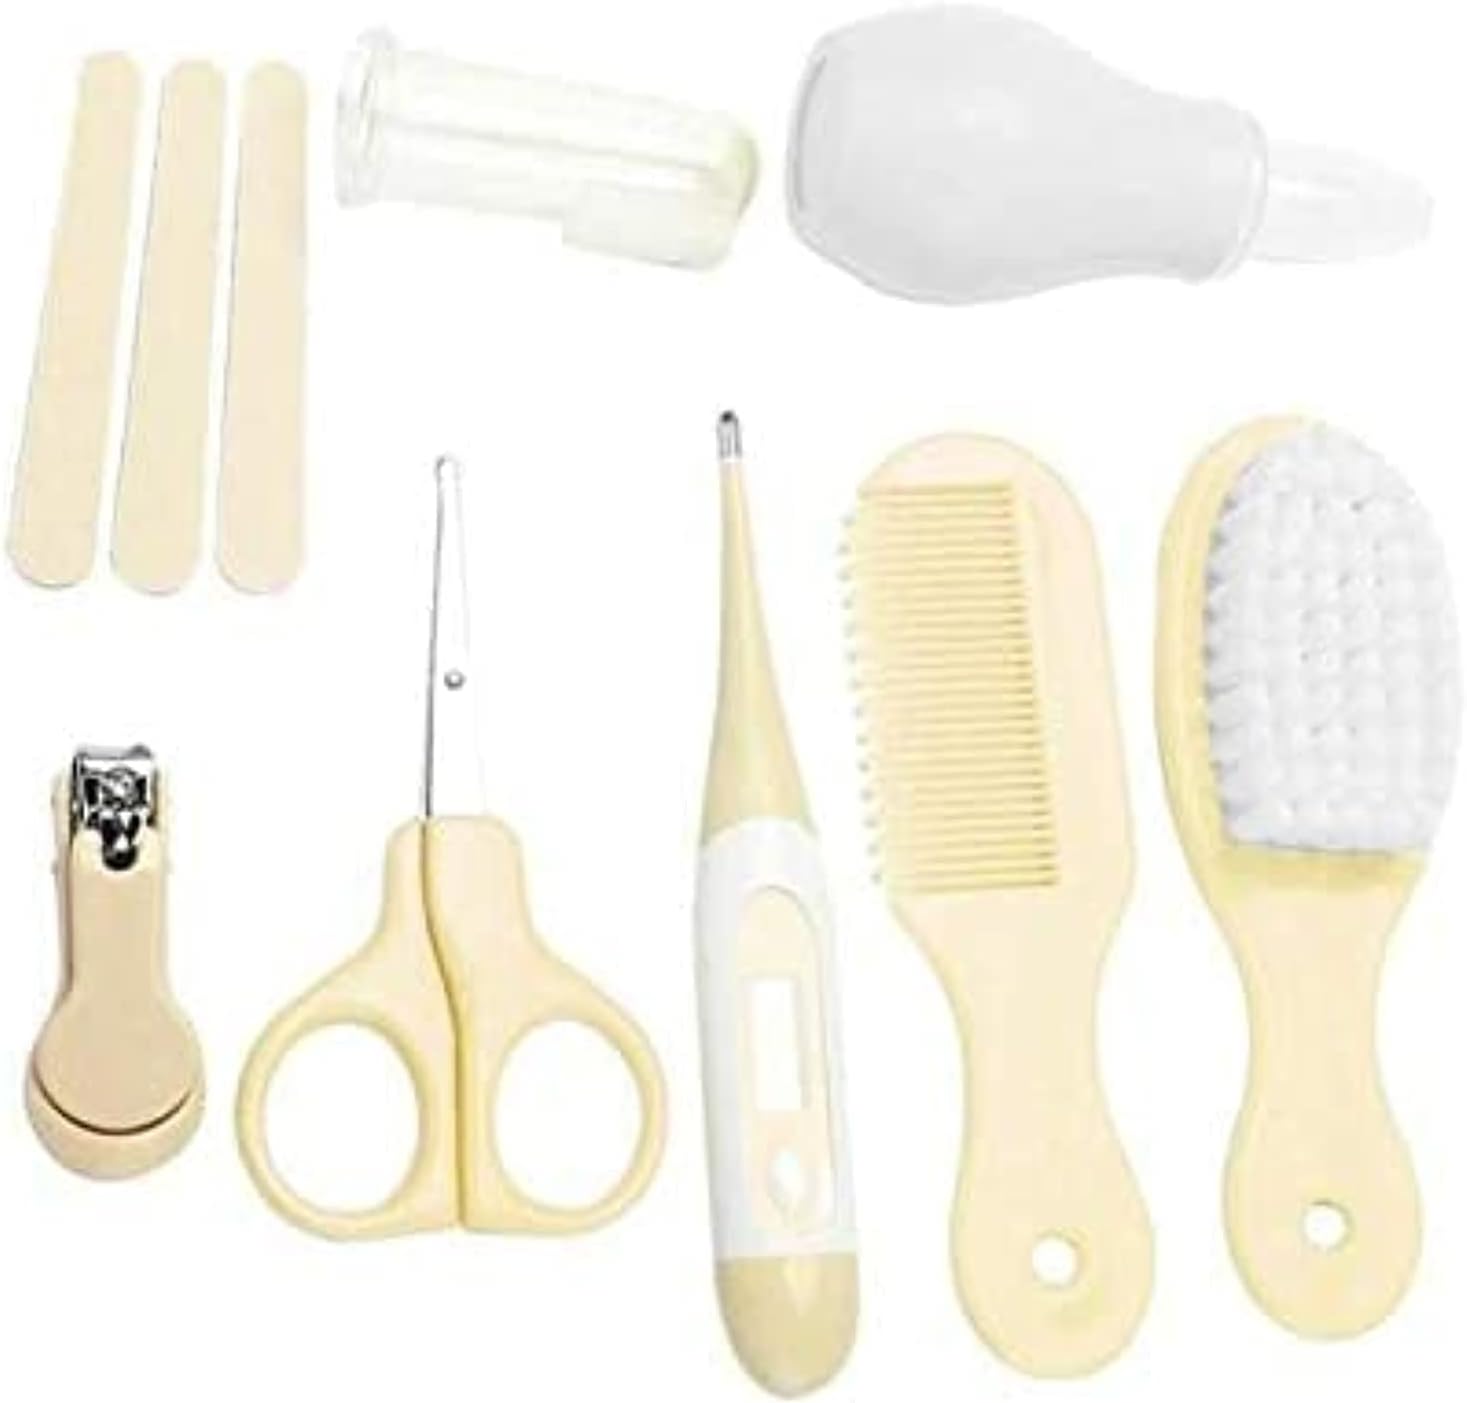 Baby Care Kit, 8Pcs Convenient Healthcare Grooming Set Nail Clipper Manicure Safety Scissors Nose Cleaner Hair Brush Comb Essential Daily Care Bathing Tool for Toddler Infant (Yellow)